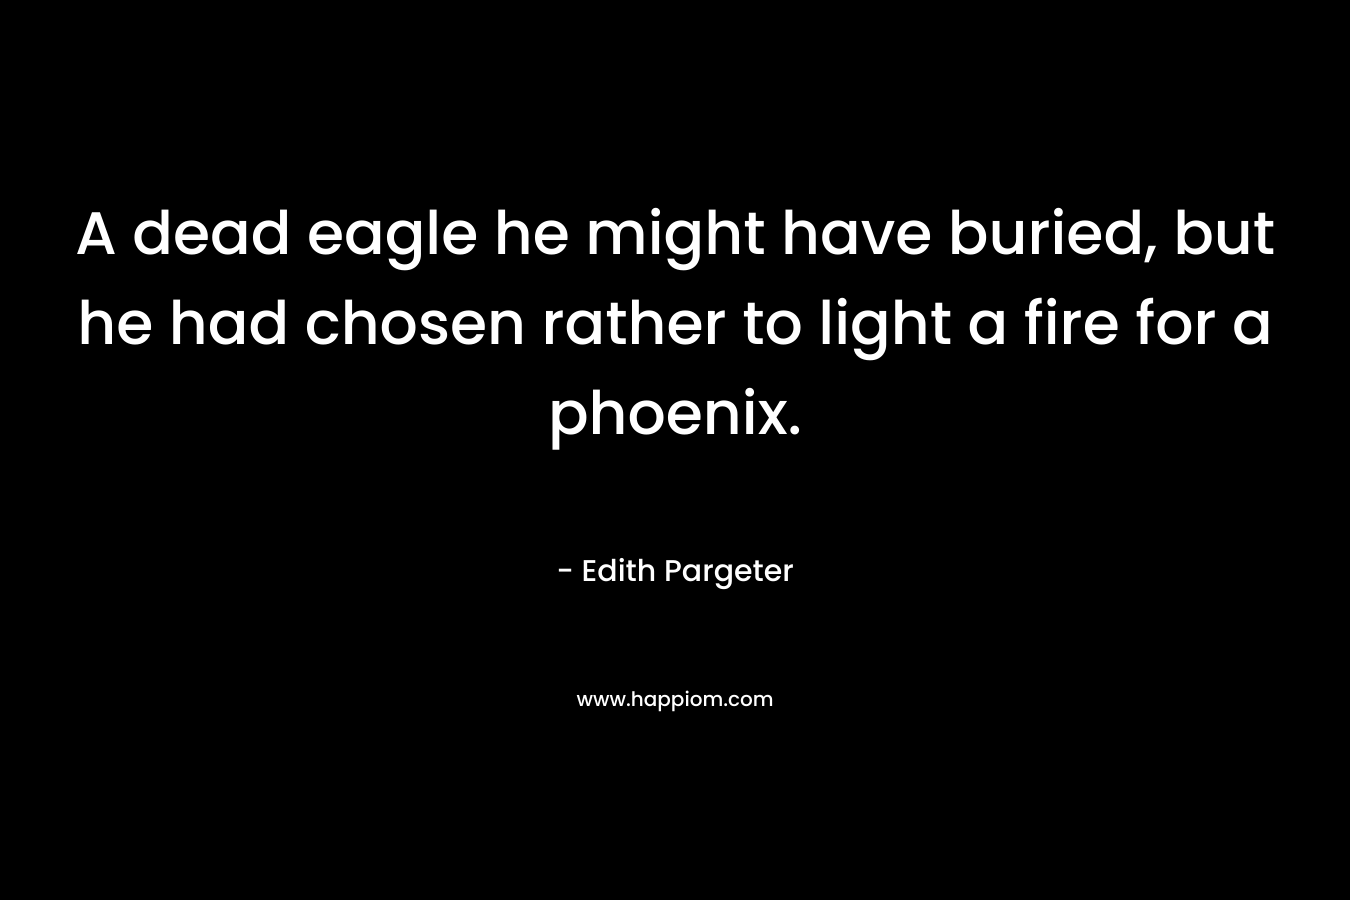 A dead eagle he might have buried, but he had chosen rather to light a fire for a phoenix. – Edith Pargeter